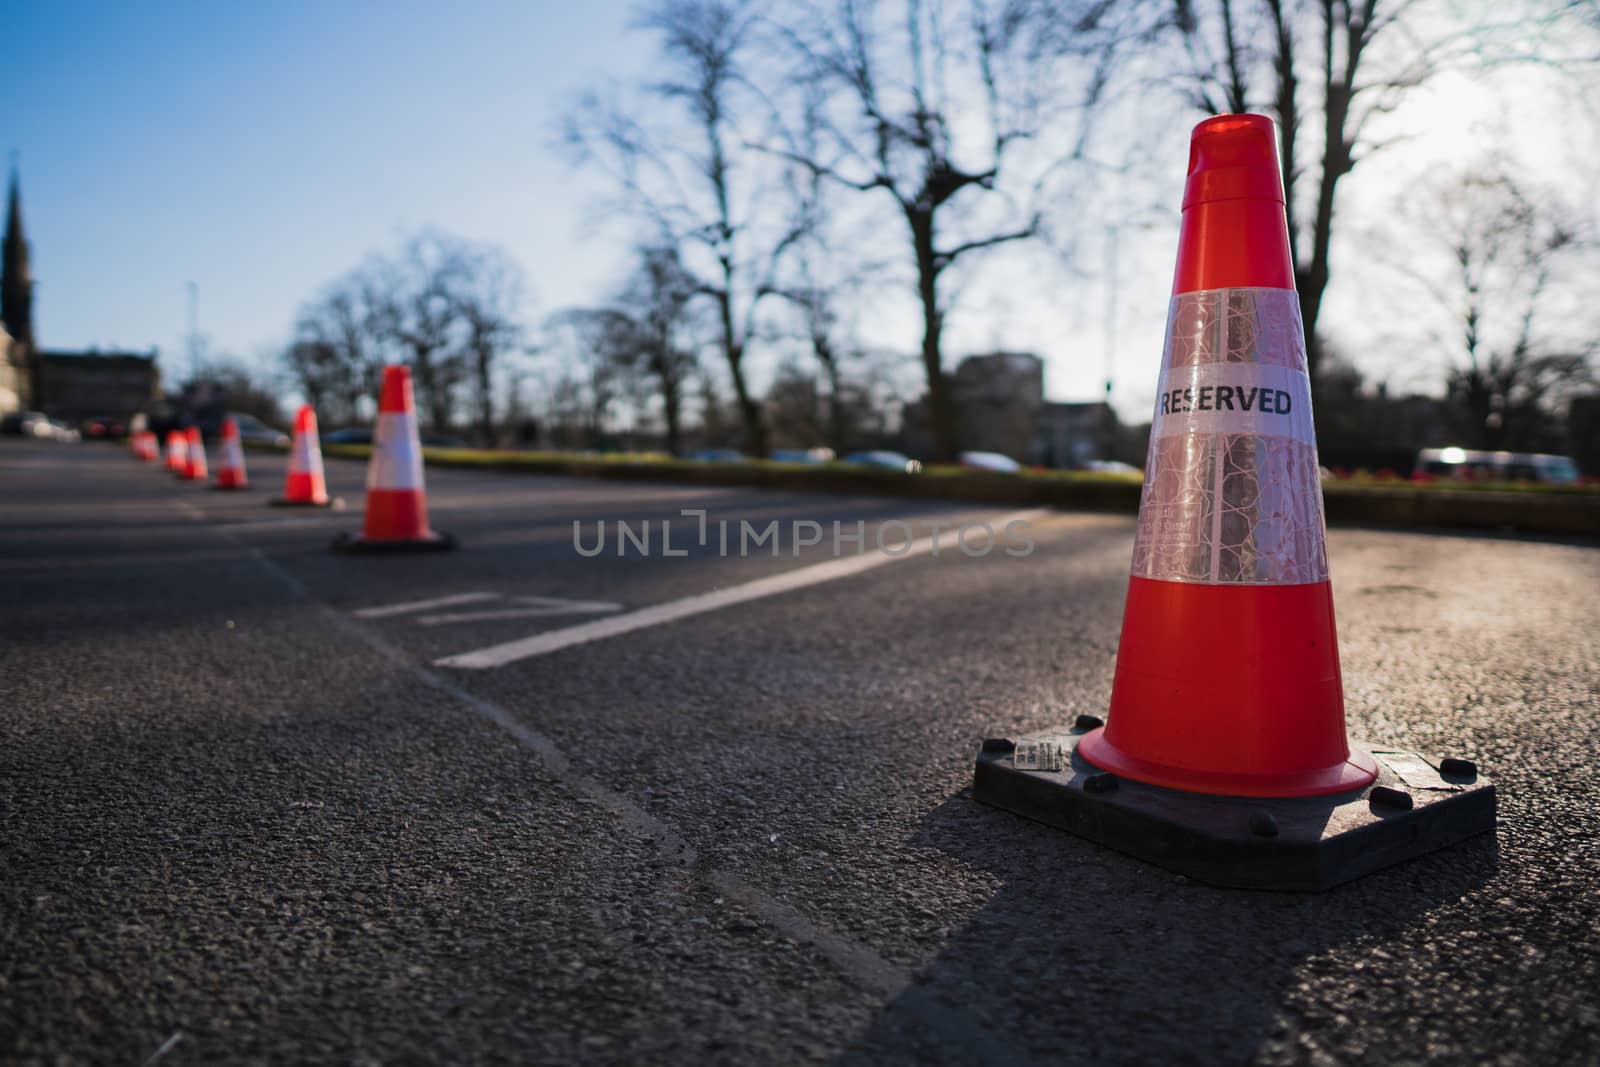 A traffic cone on a street in the UK